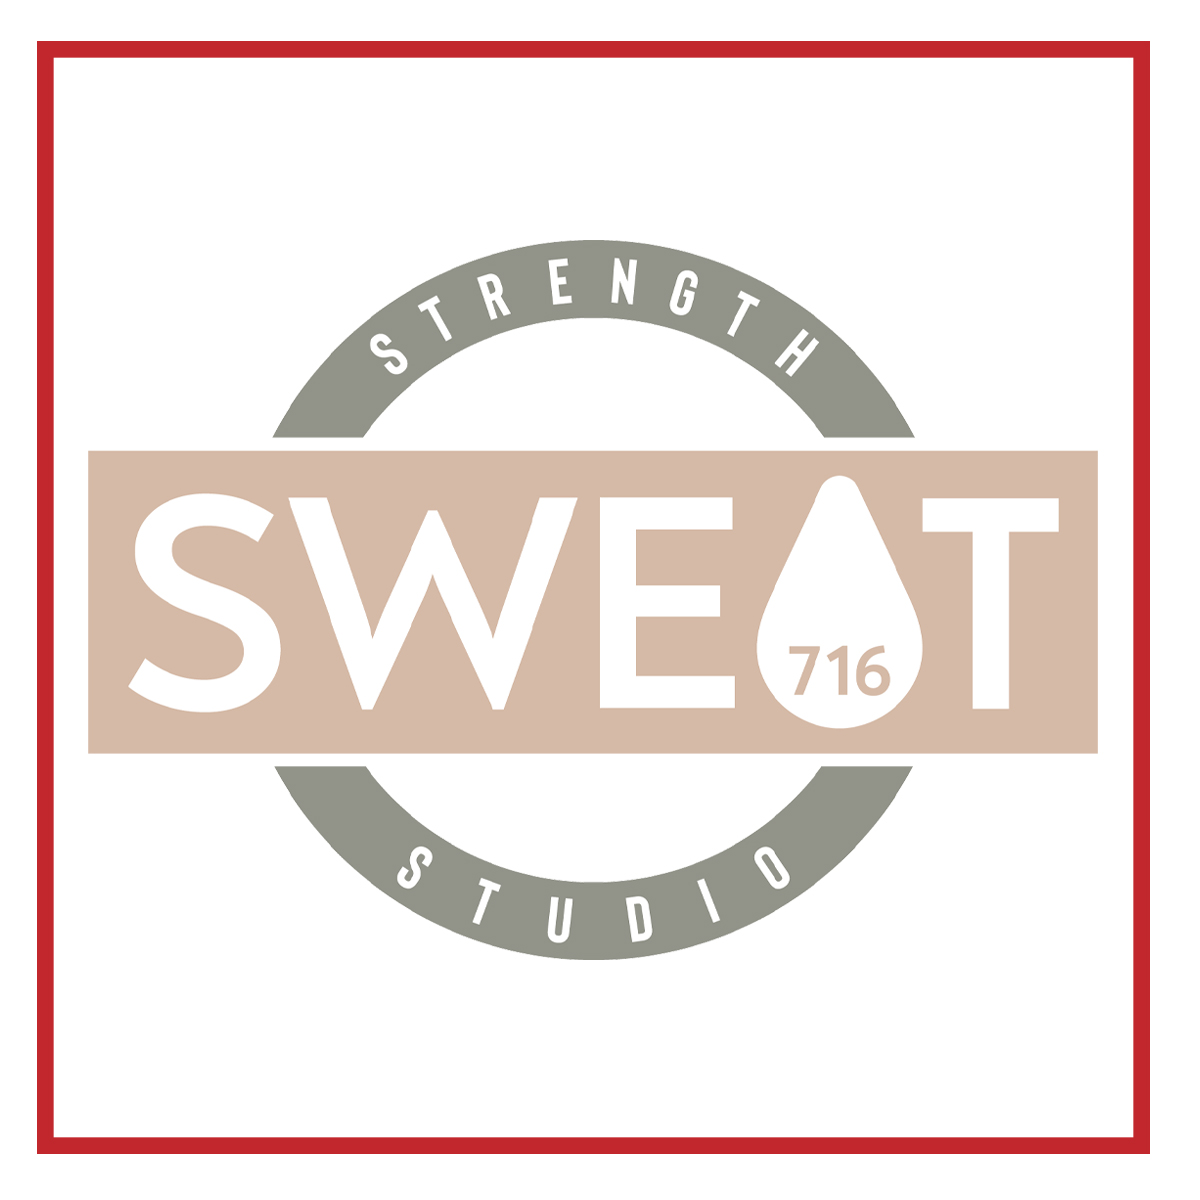 You are currently viewing Sweat 716